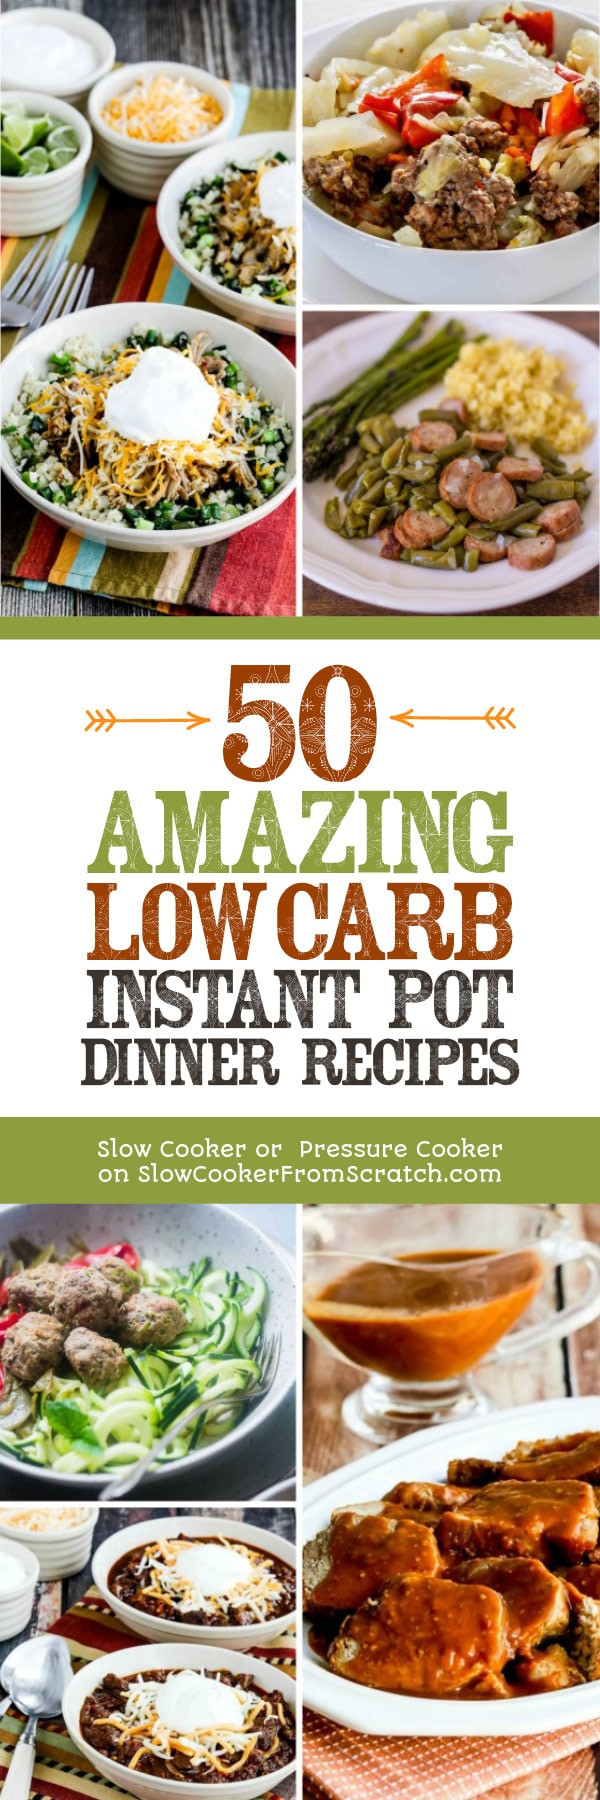 Low Carb Recipes For Instant Pot
 50 AMAZING Low Carb Instant Pot Dinner Recipes Slow